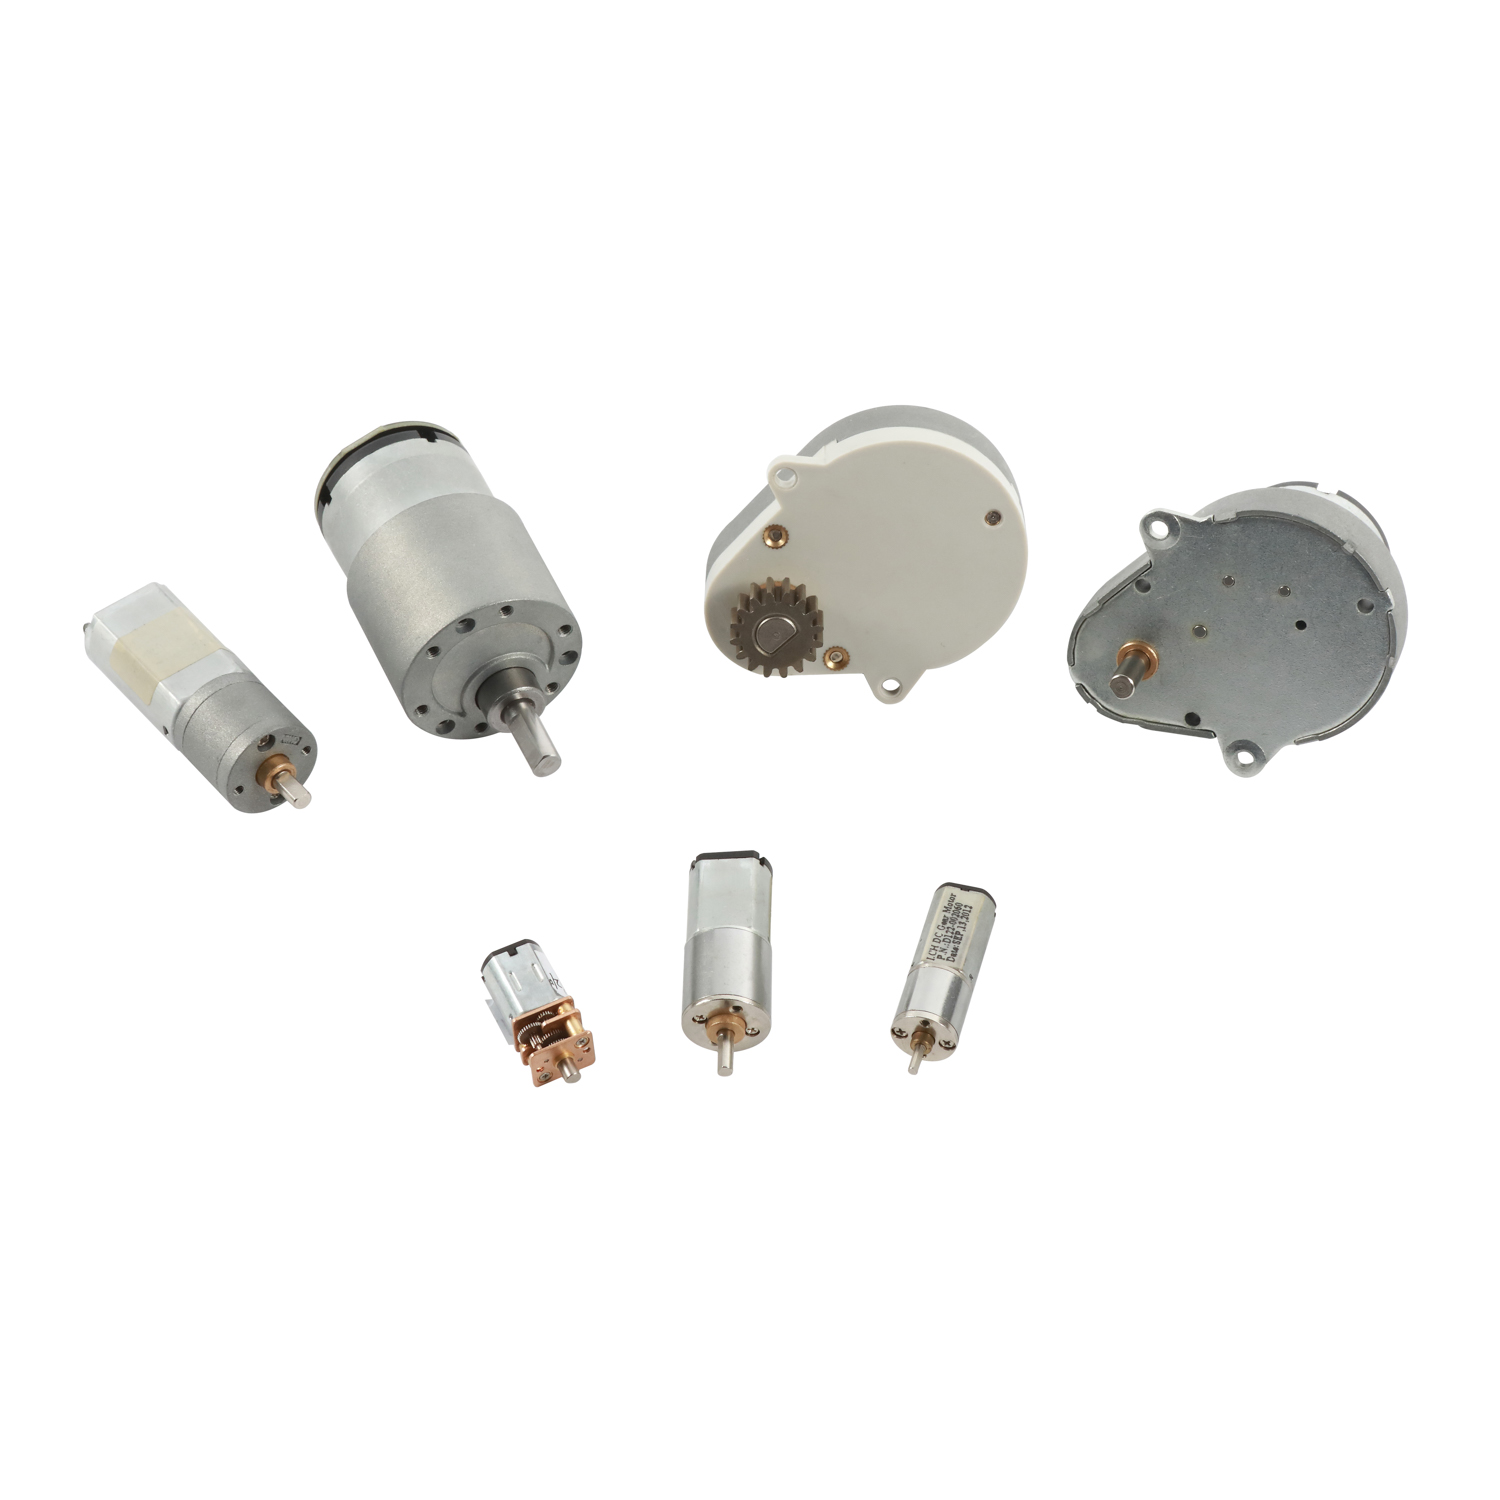 Mini 6v DC Motor With Gearbox